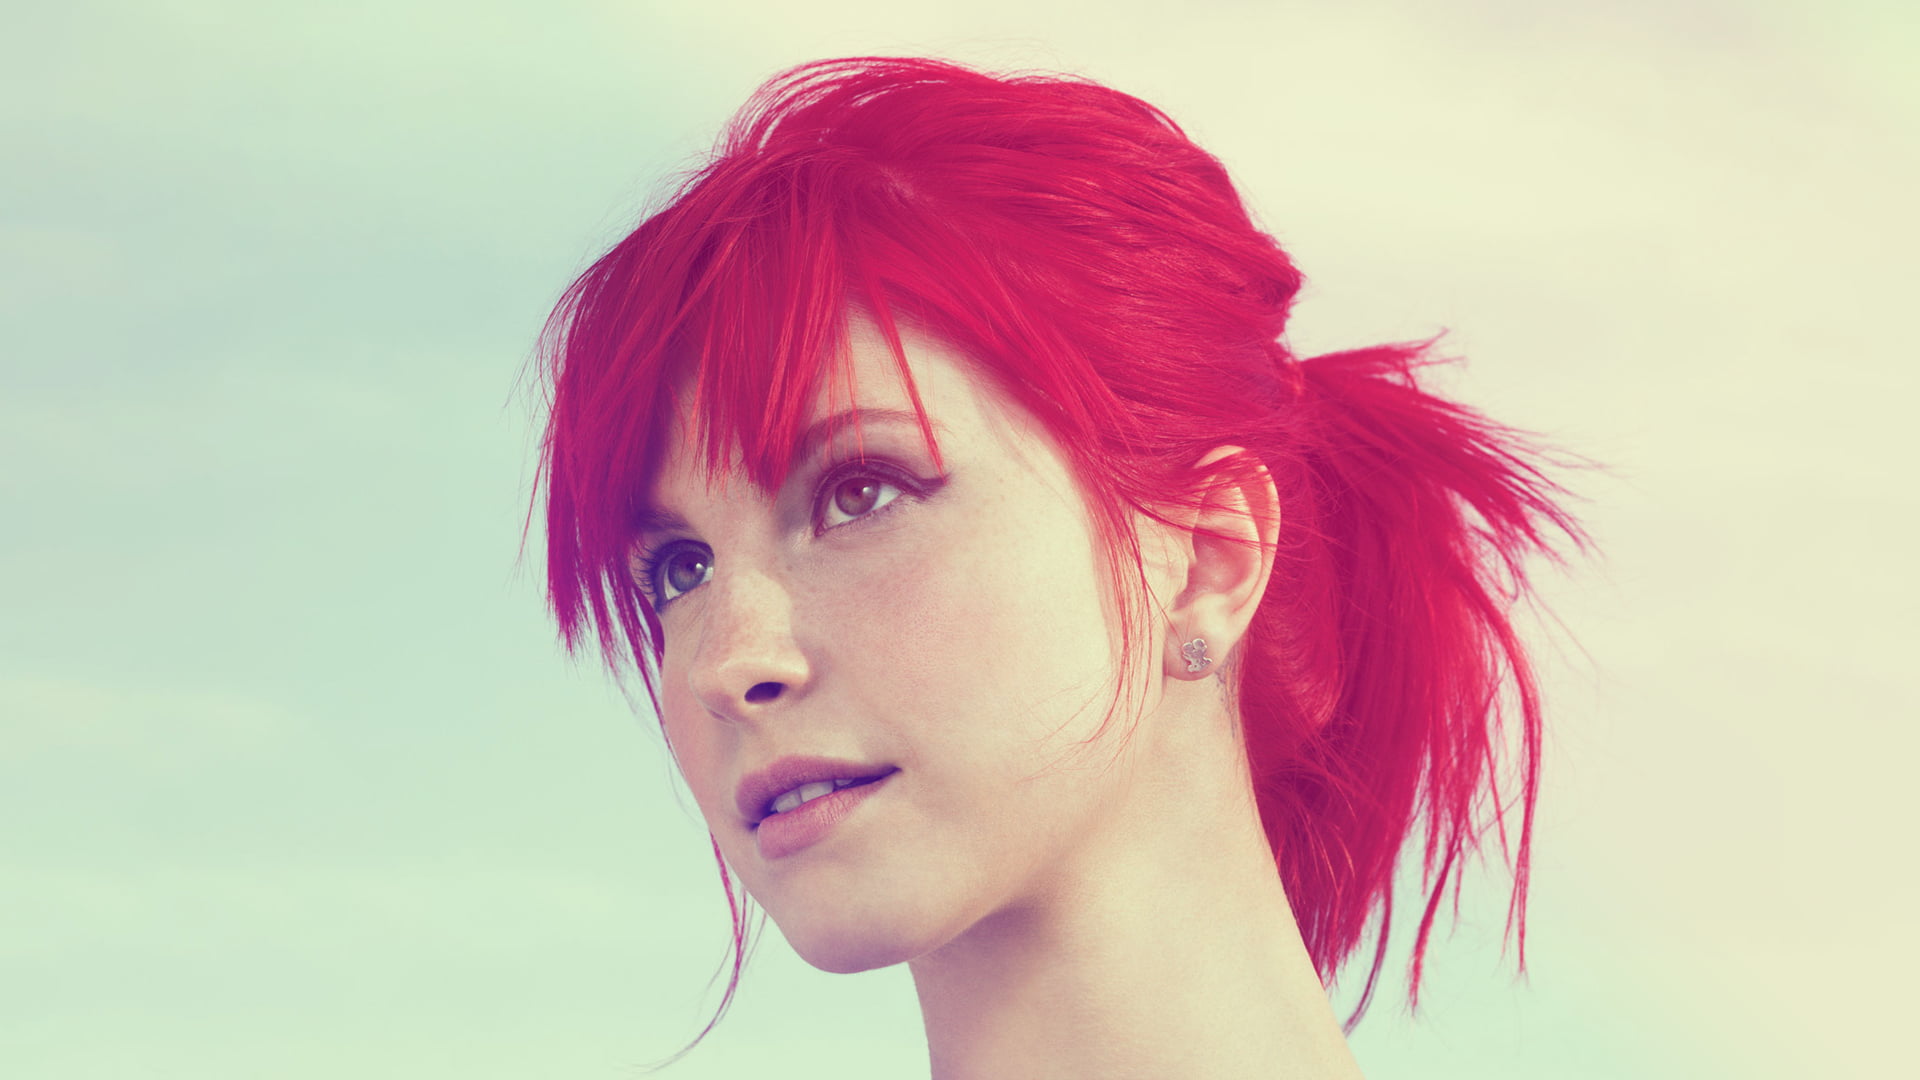 women's red hair, Hayley Williams, redhead, face, singer, dyed hair